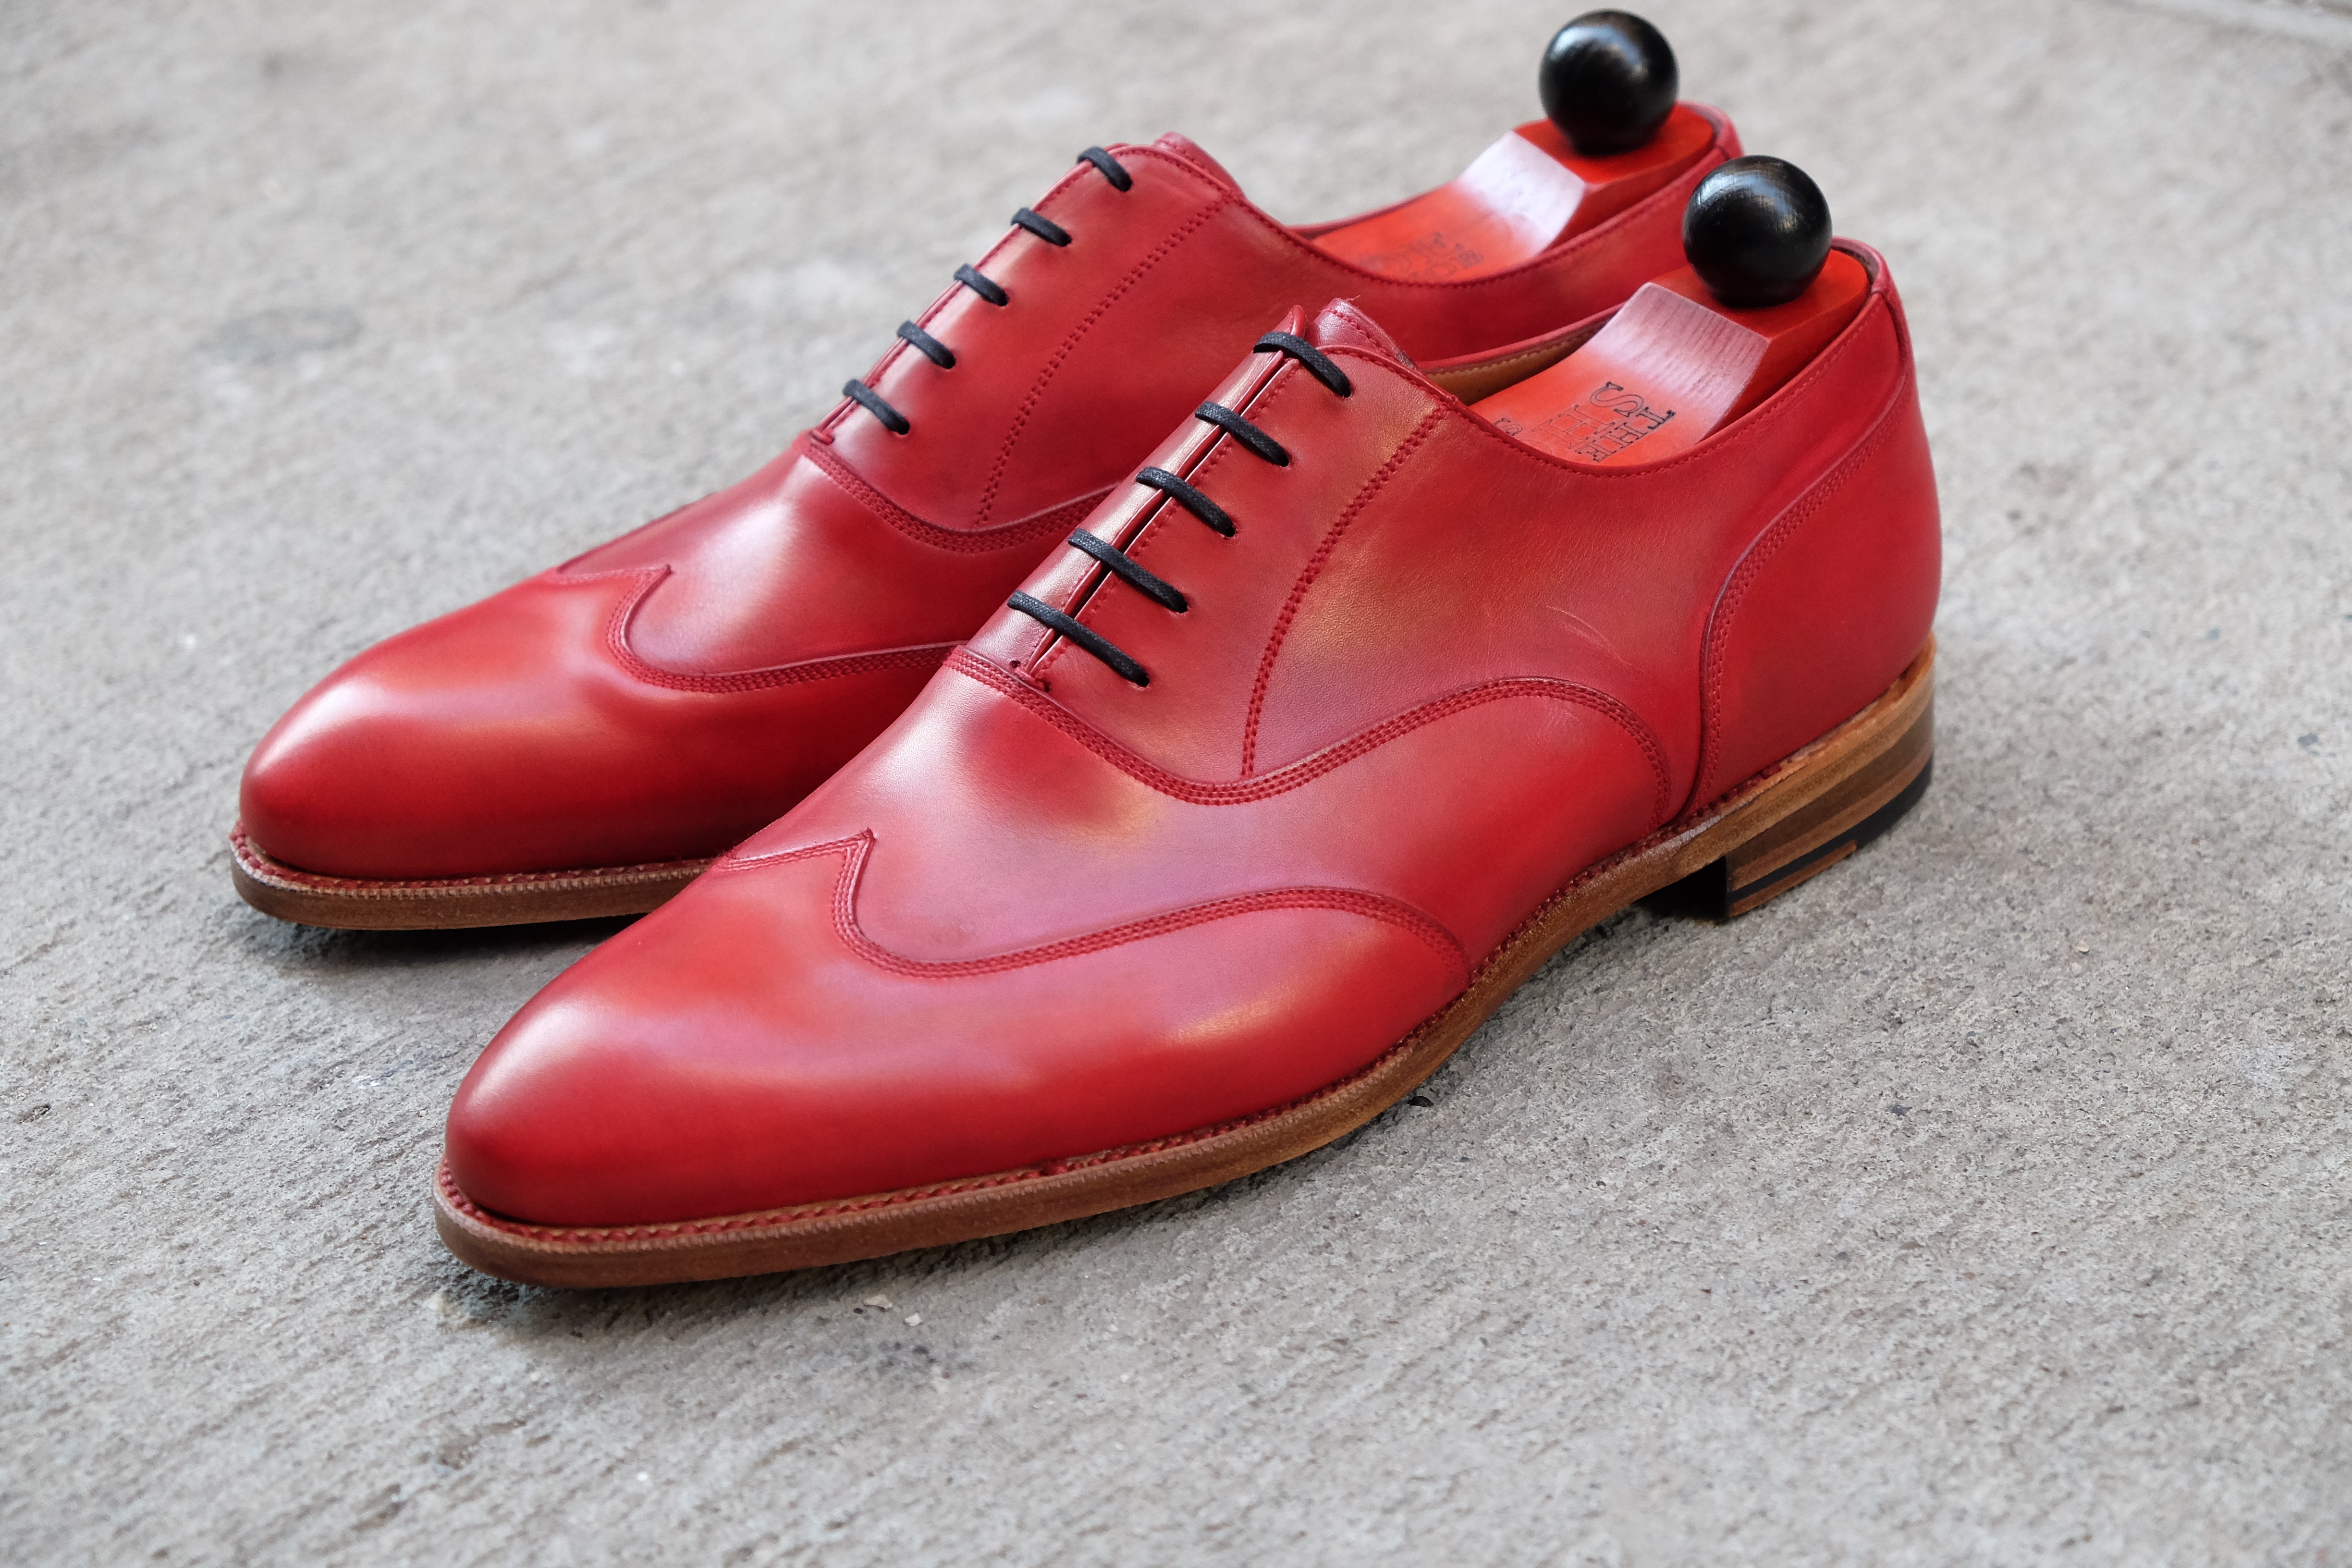 Pullman - MTO - Unfinished Red Calf - NGT Last - Natural Single Leather Sole